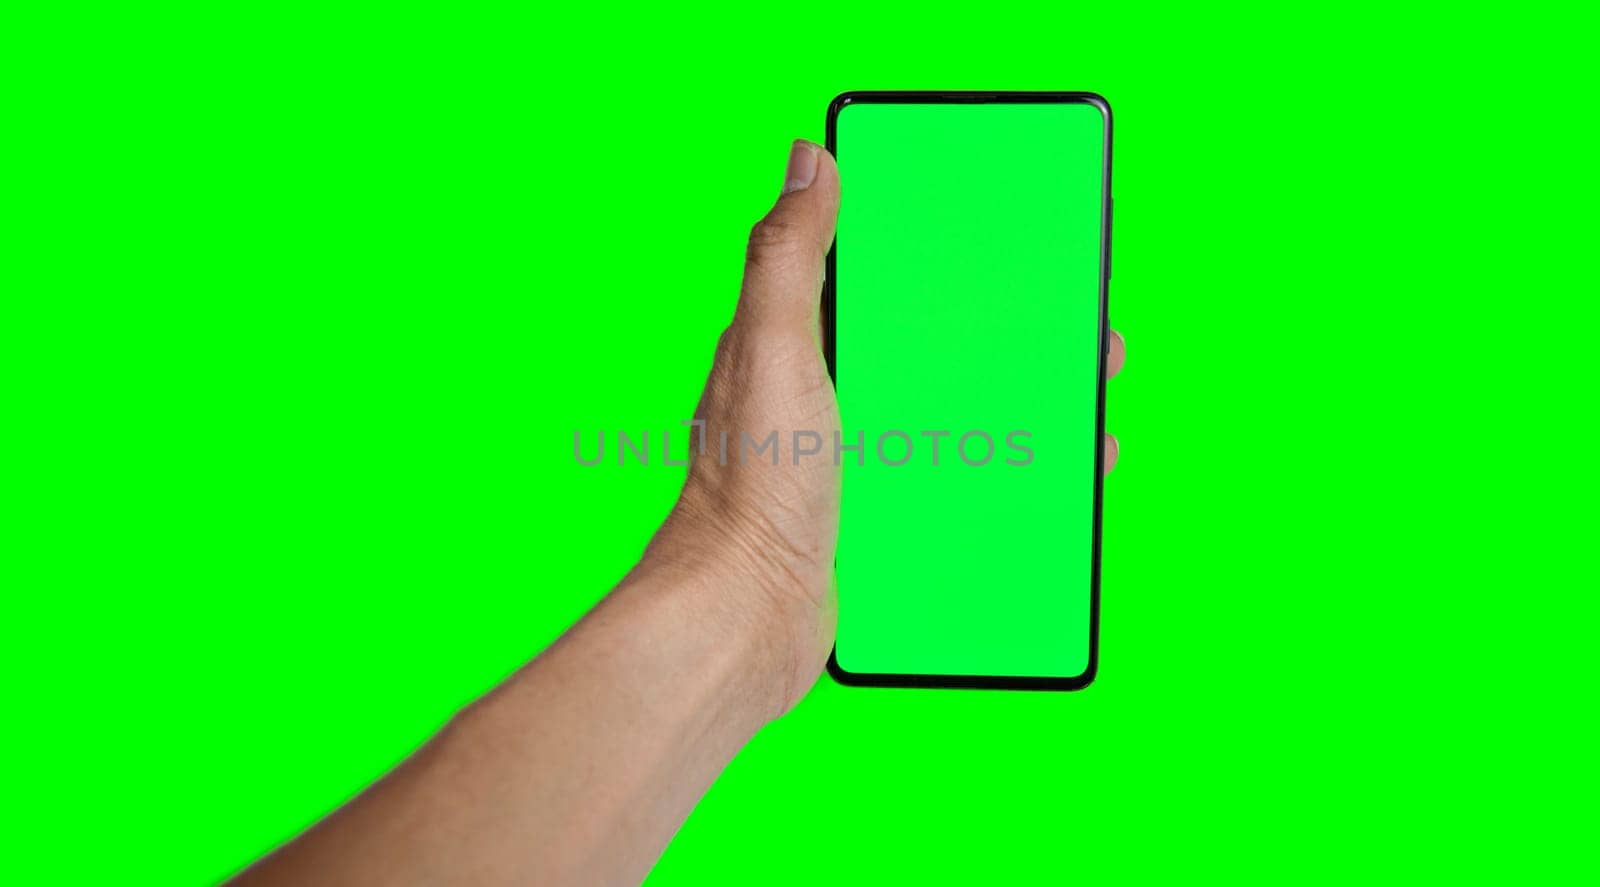 hand holding a green smartphone on a green background